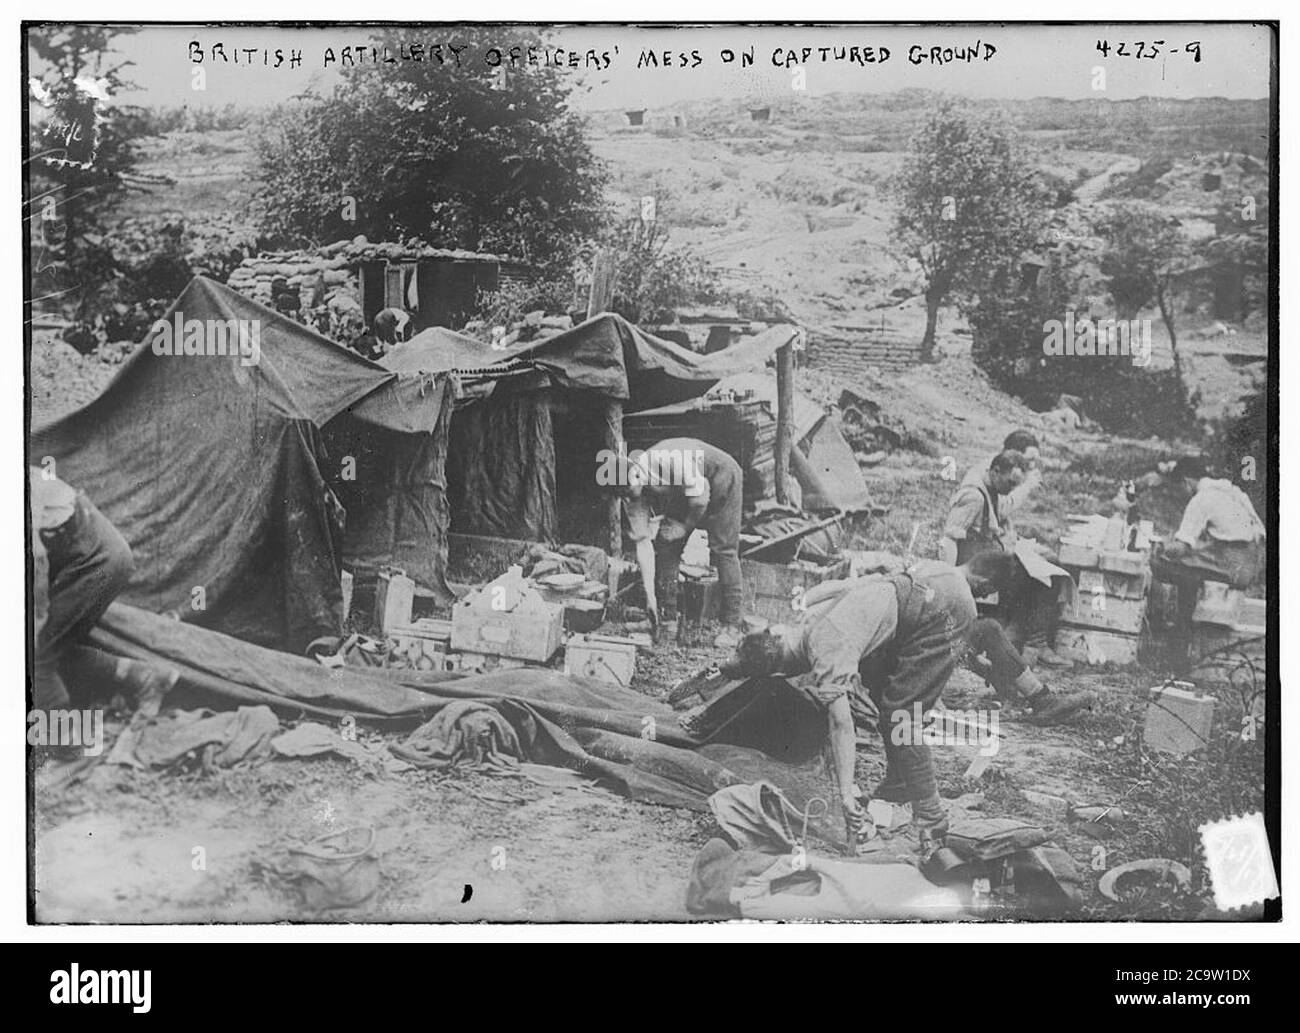 British artillery officers' mess on captured ground Stock Photo - Alamy